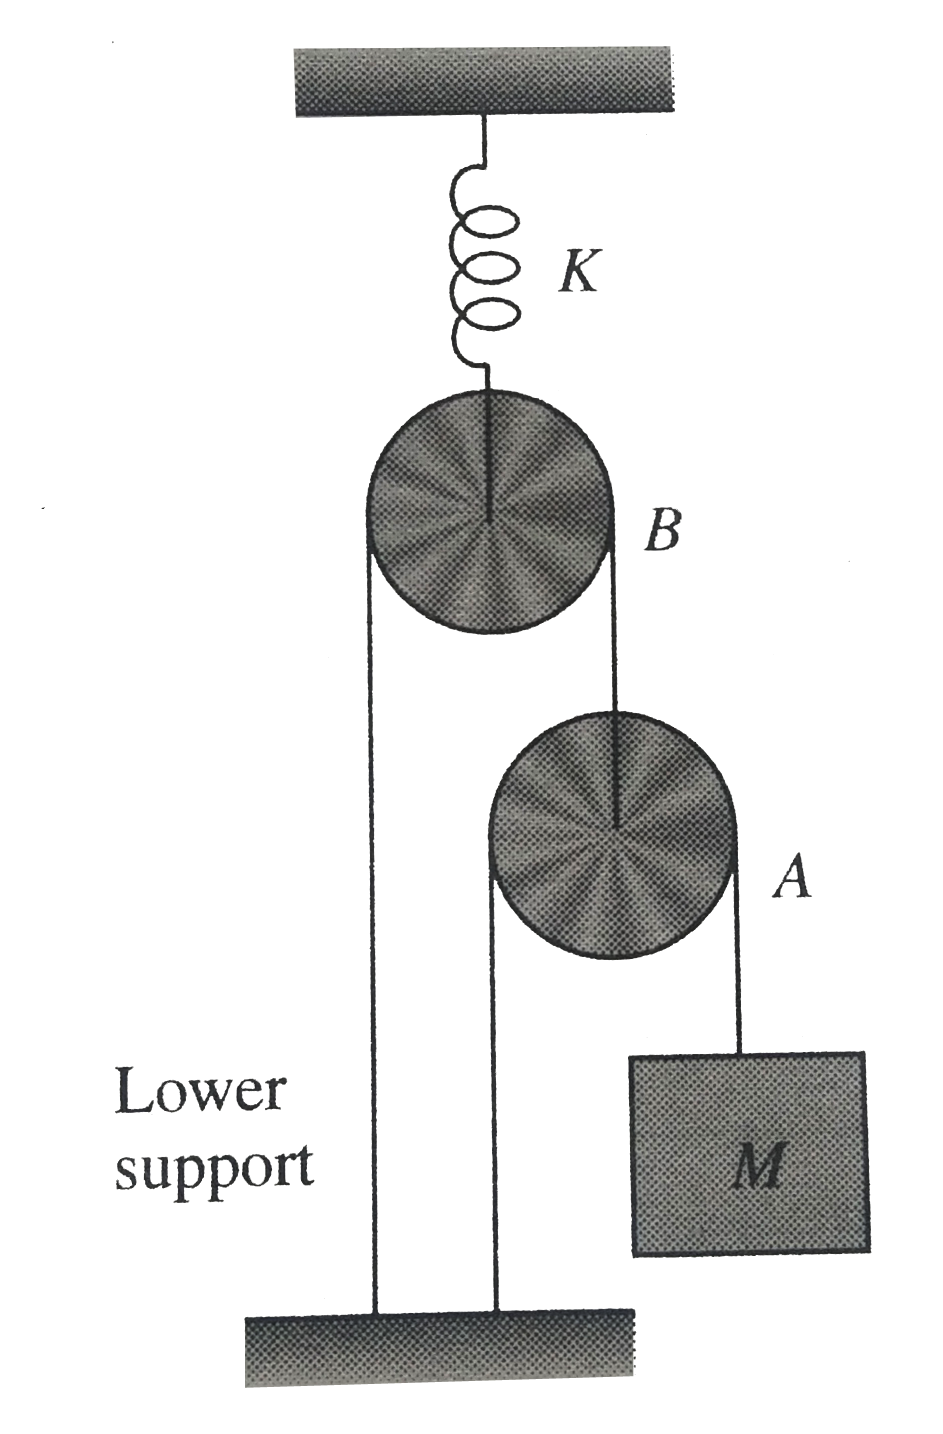 A mass M is suspended as shown in fig. The system is in equilibrium. Assume pulleys to be massless.  K is the force constant of the spring.        The extension produced in the spring is given by